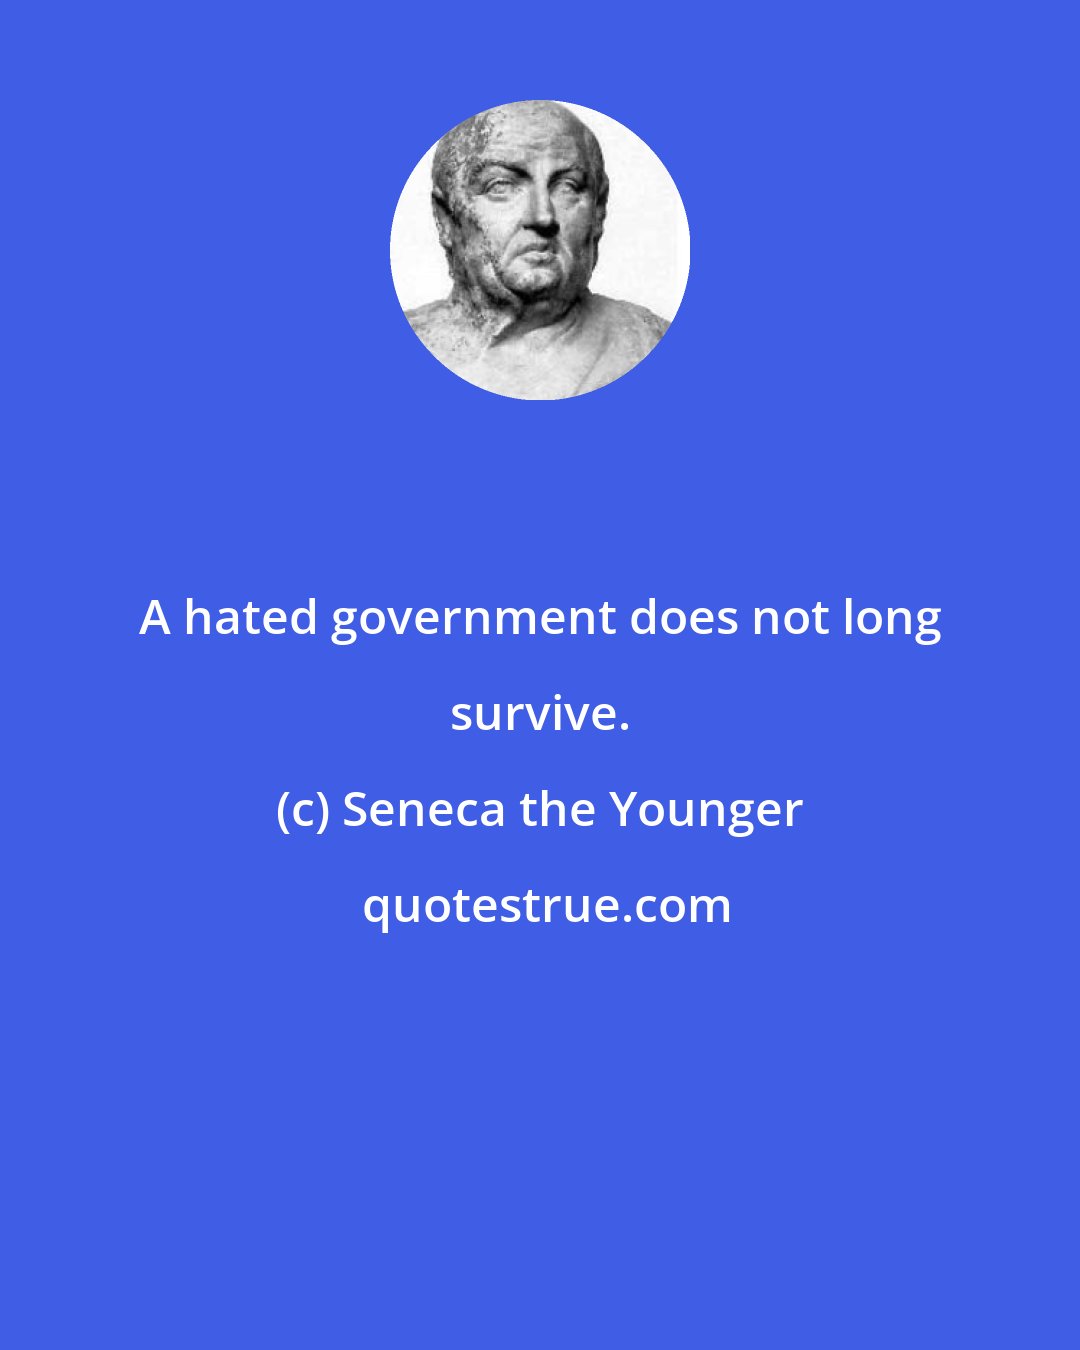 Seneca the Younger: A hated government does not long survive.